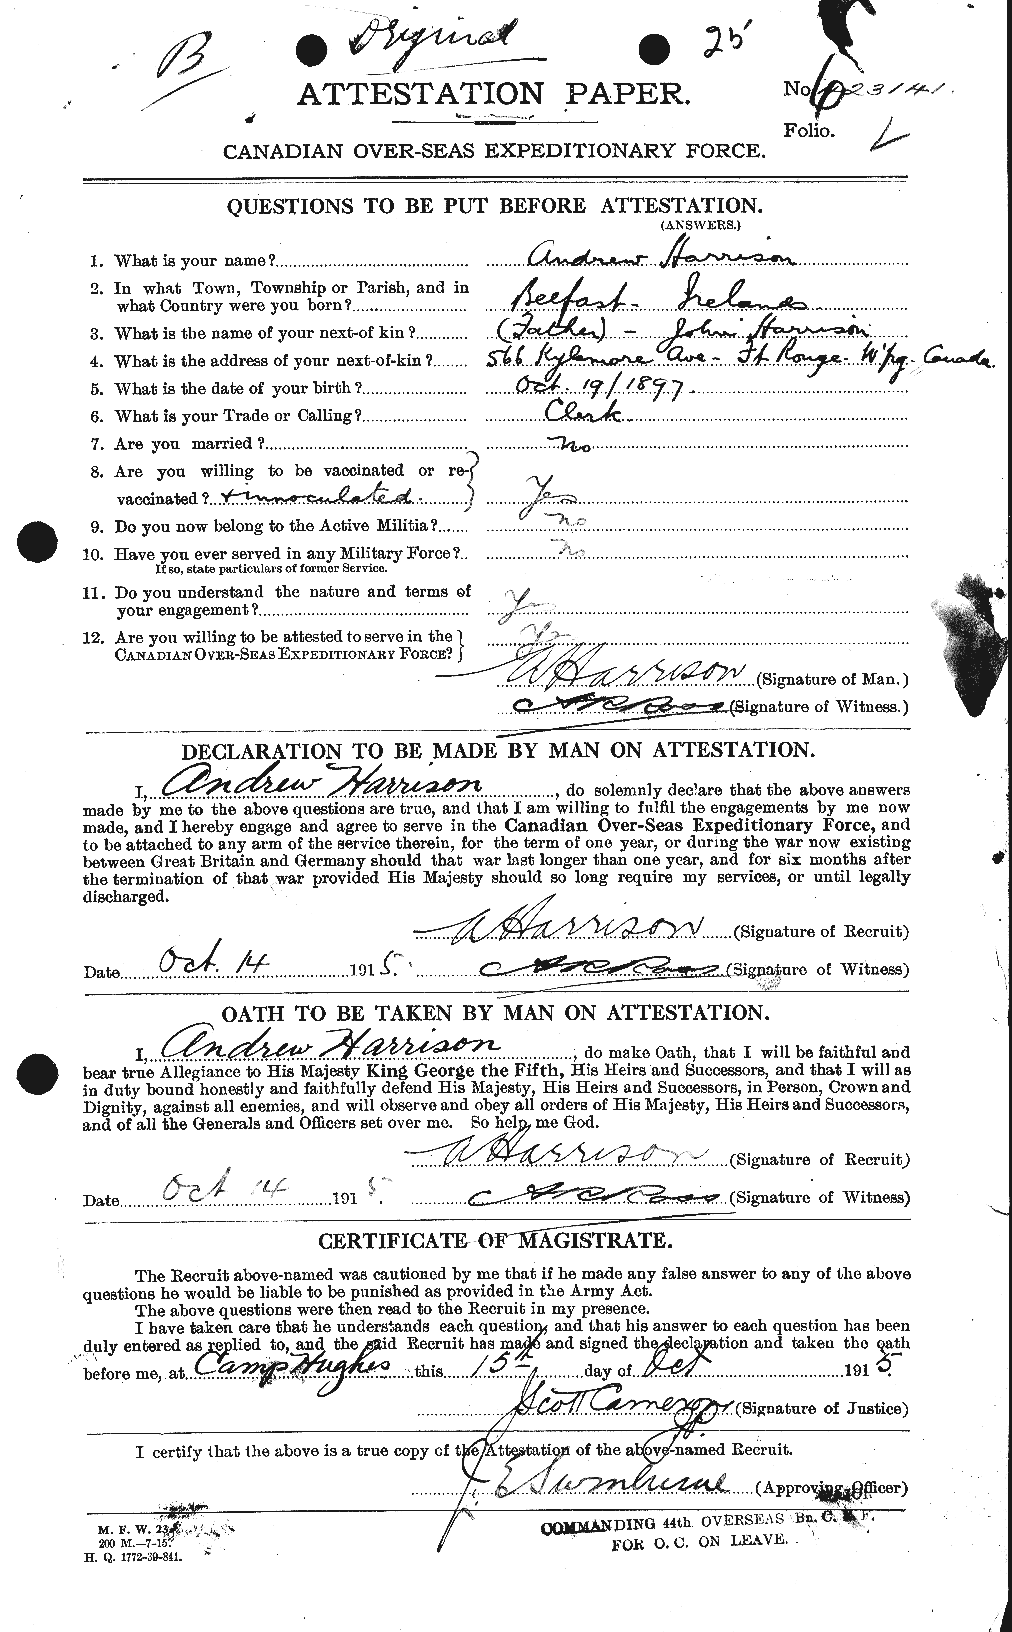 Personnel Records of the First World War - CEF 380225a